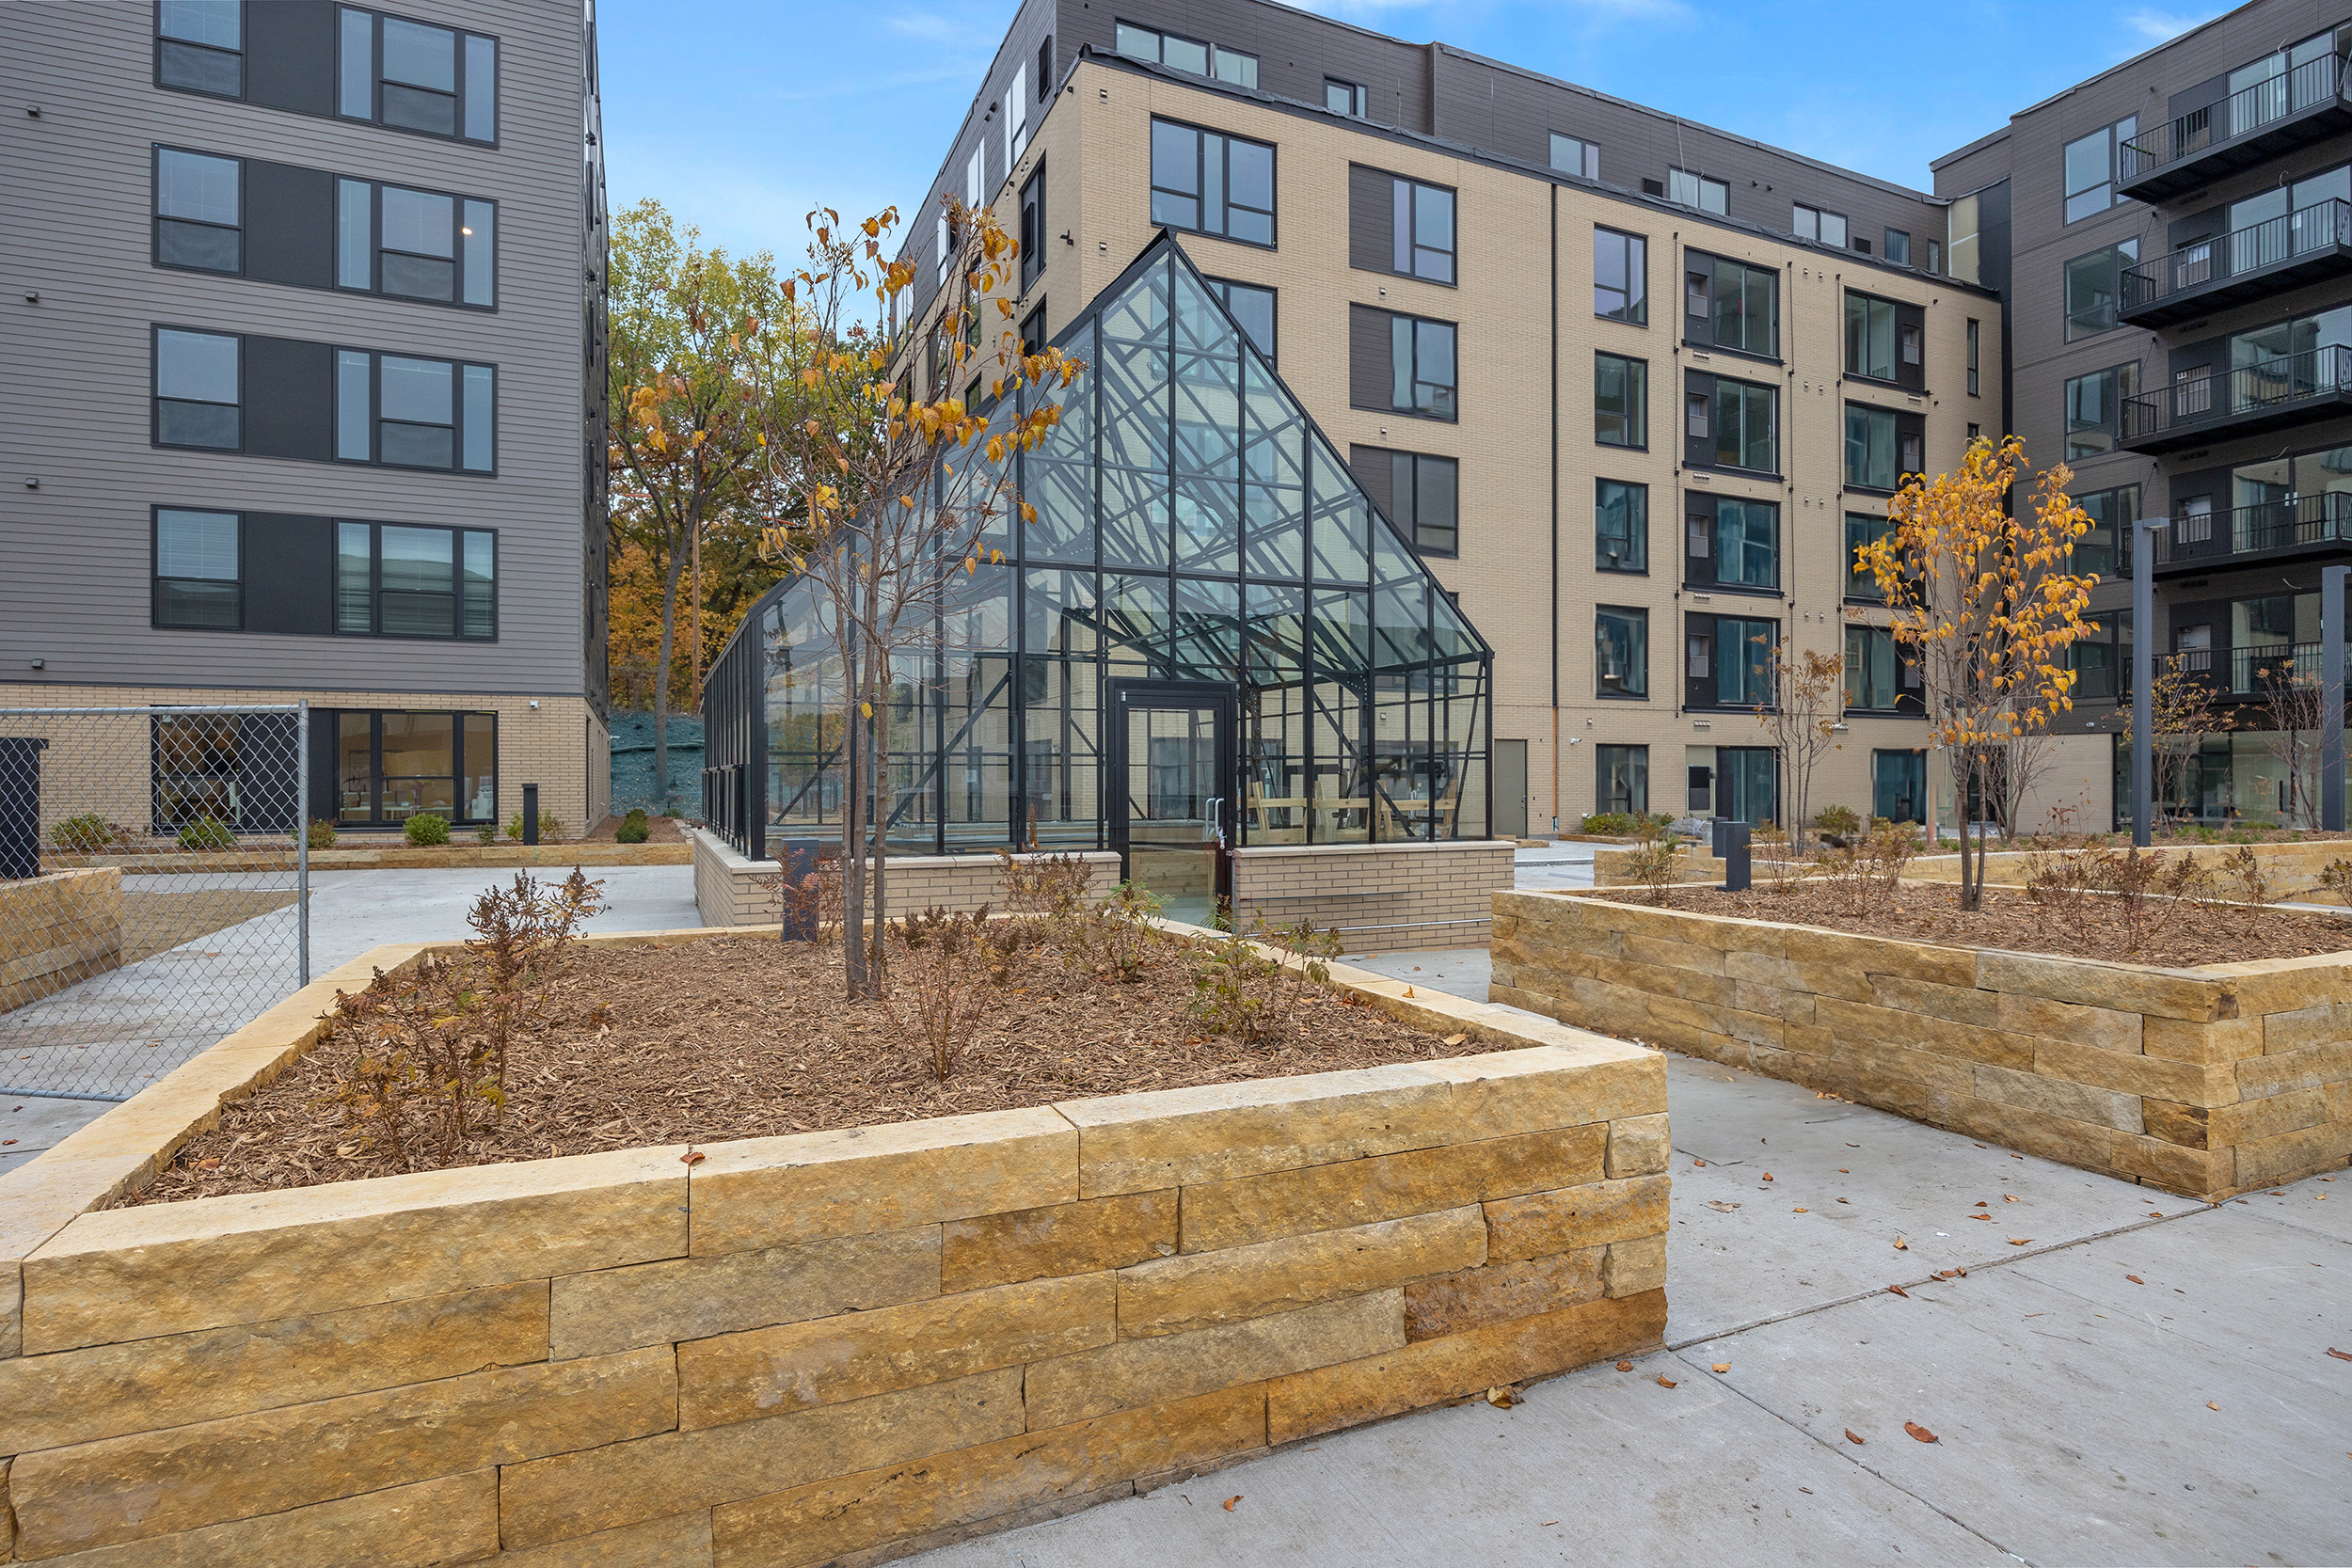 An exterior photo of two new apartments conjoined by a large greenhouse in a courtyard